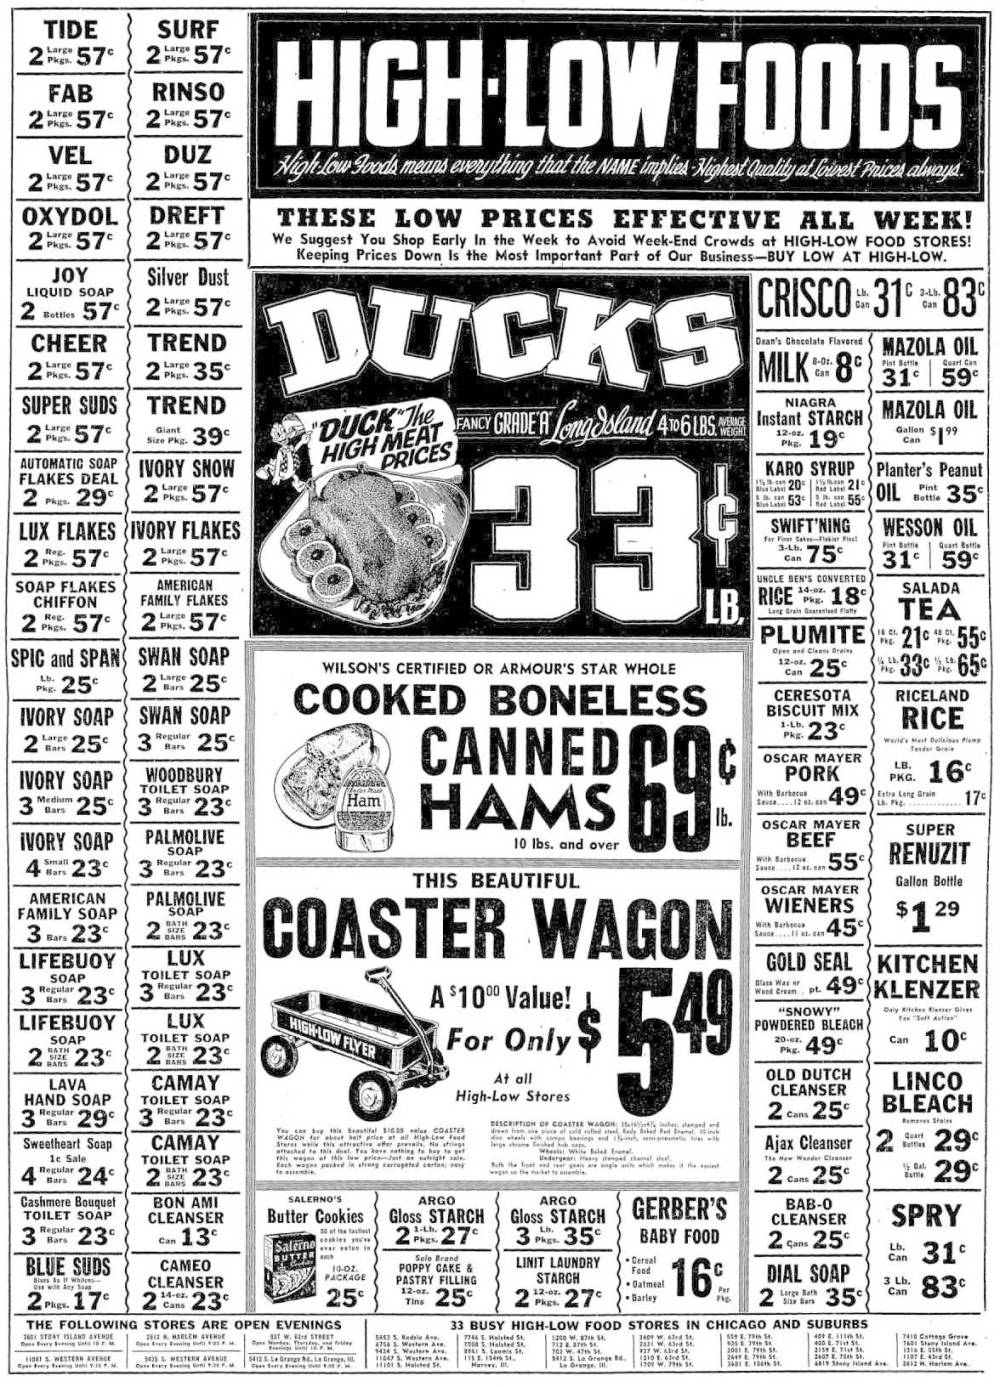 FLYER - CHICAGO - HIGH-LOW FOOD STORES FROM CHICAGO TRIBUNE - 75TH AND 79TH STREET STORES LISTED - NOTE WAGONS - MAY 11 1952